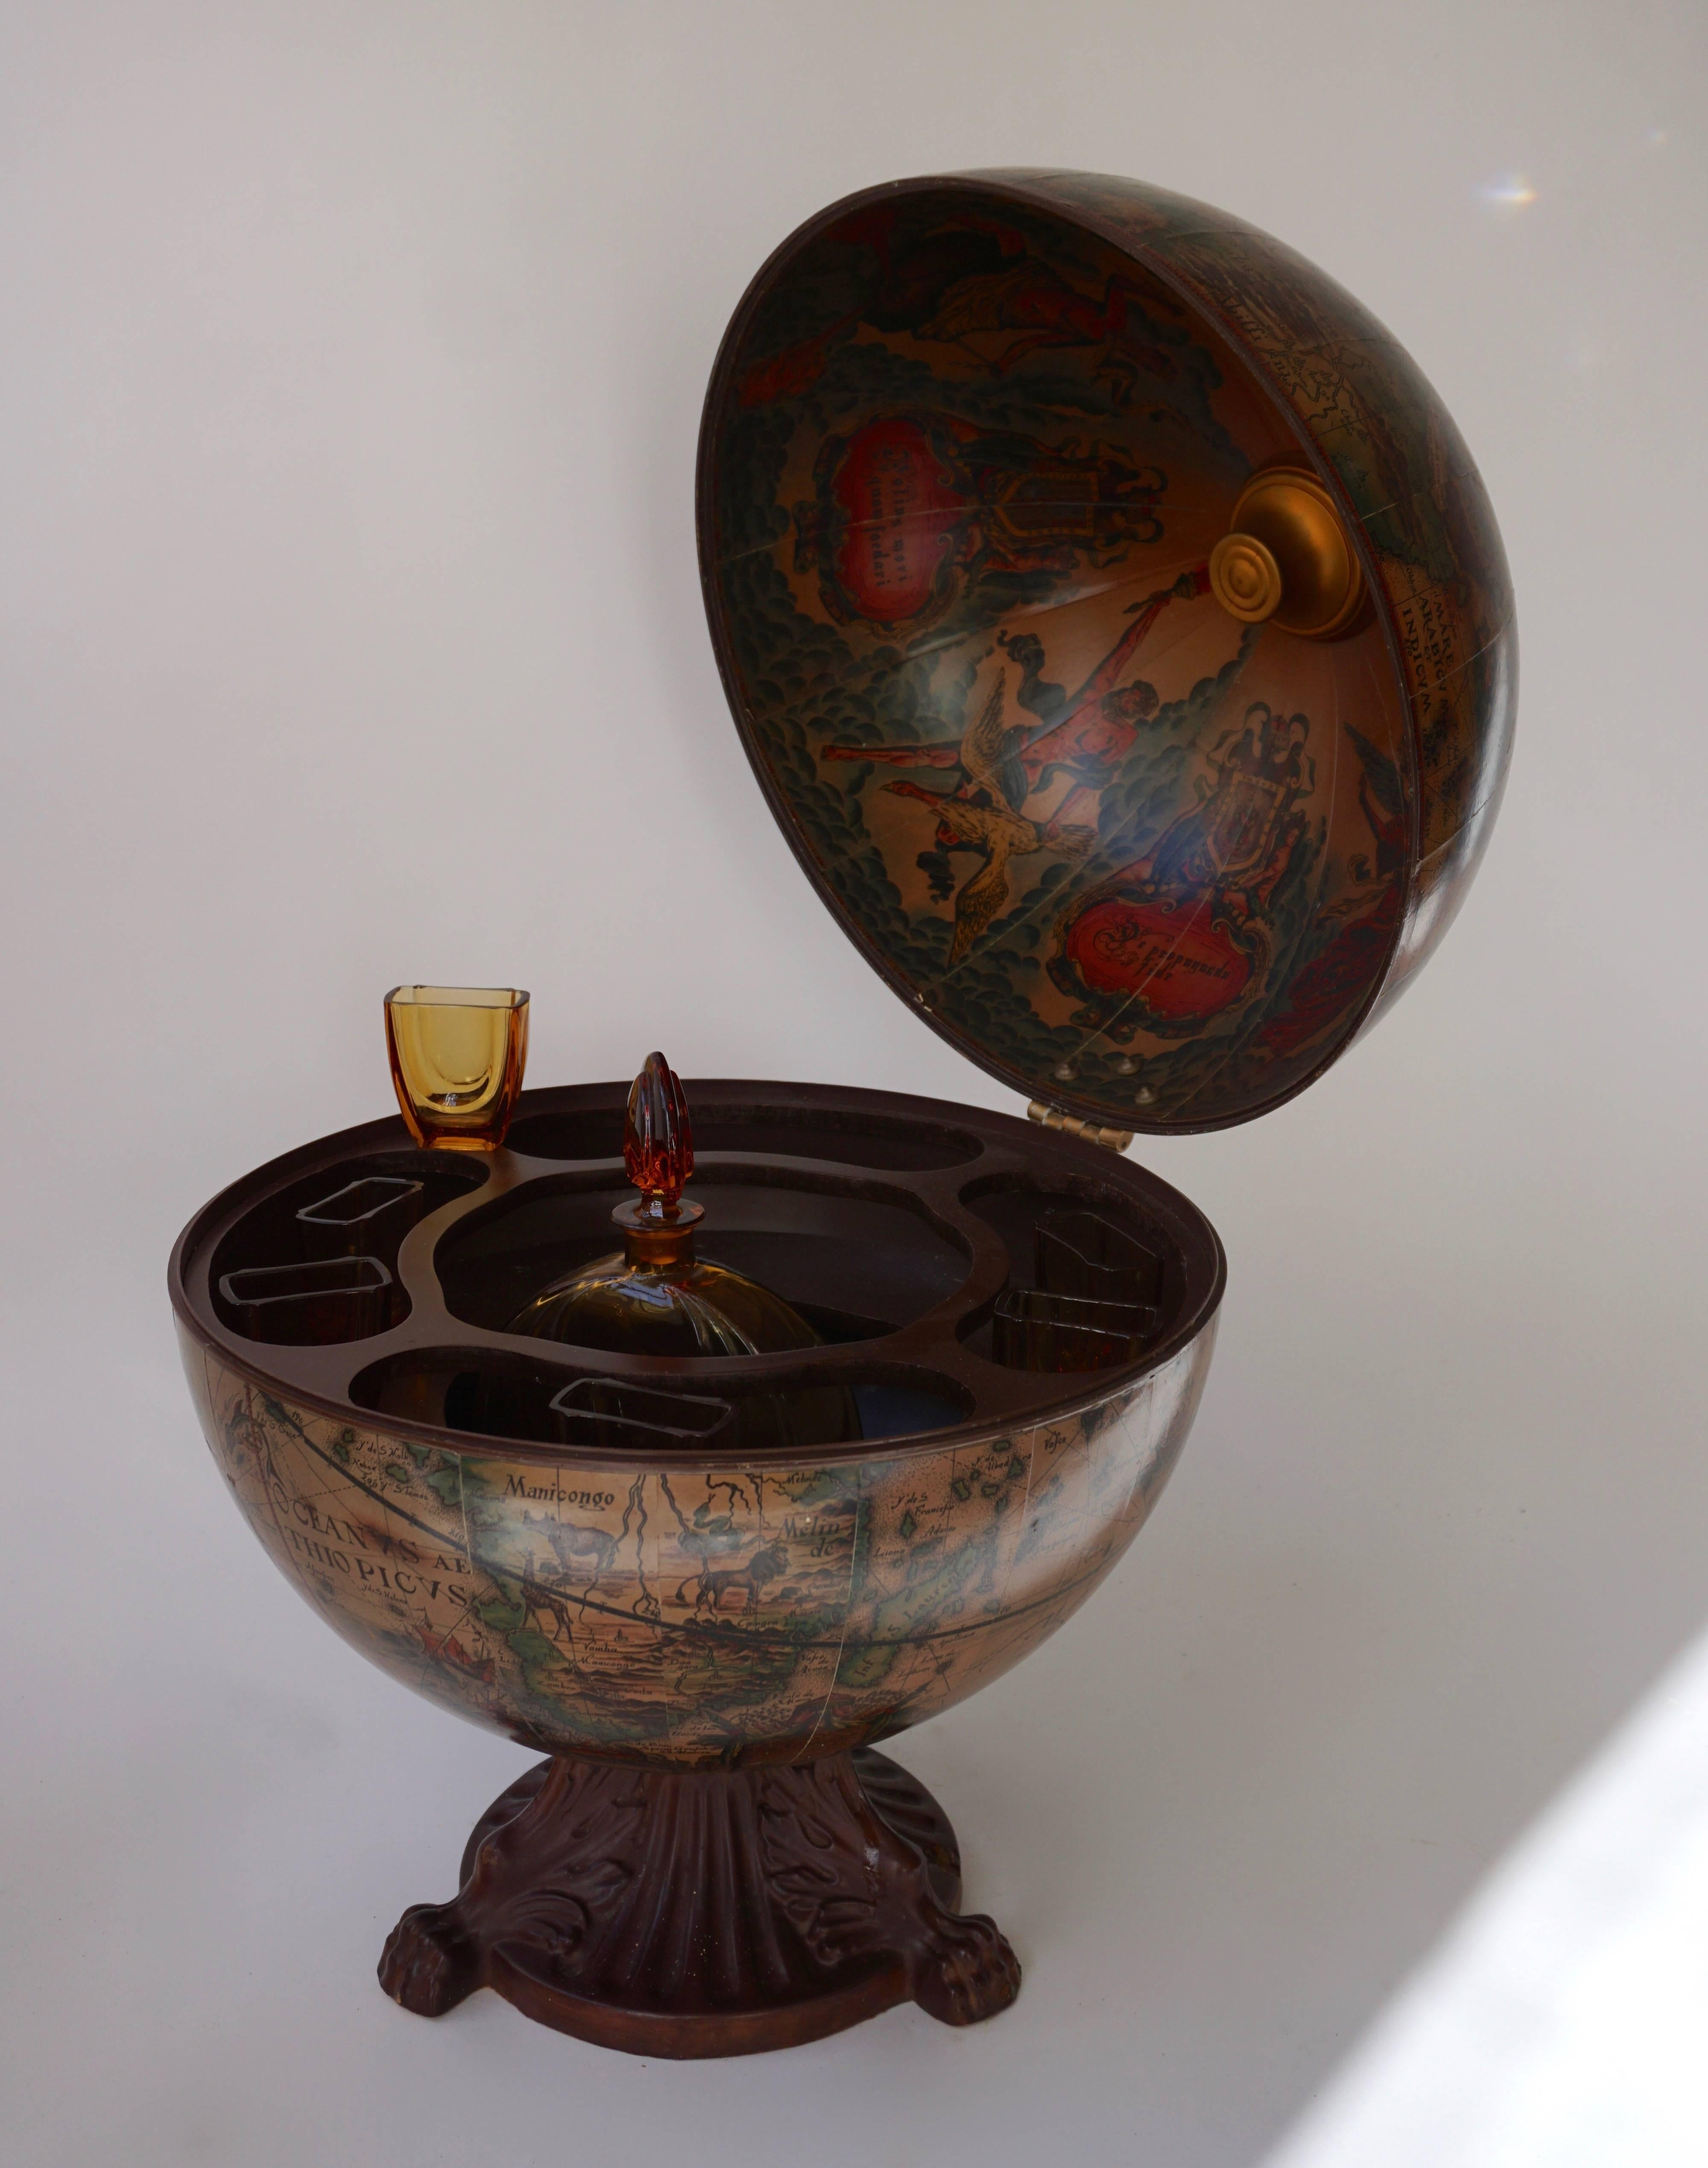 Very elegant Italian Mid-Century Modern globe dry bar. The globe opens to reveal a dry bar inside with plenty of space. Having pictures of Greek mythology and mythical creatures. Adding the perfect decor to any room.
Measures: Height 55